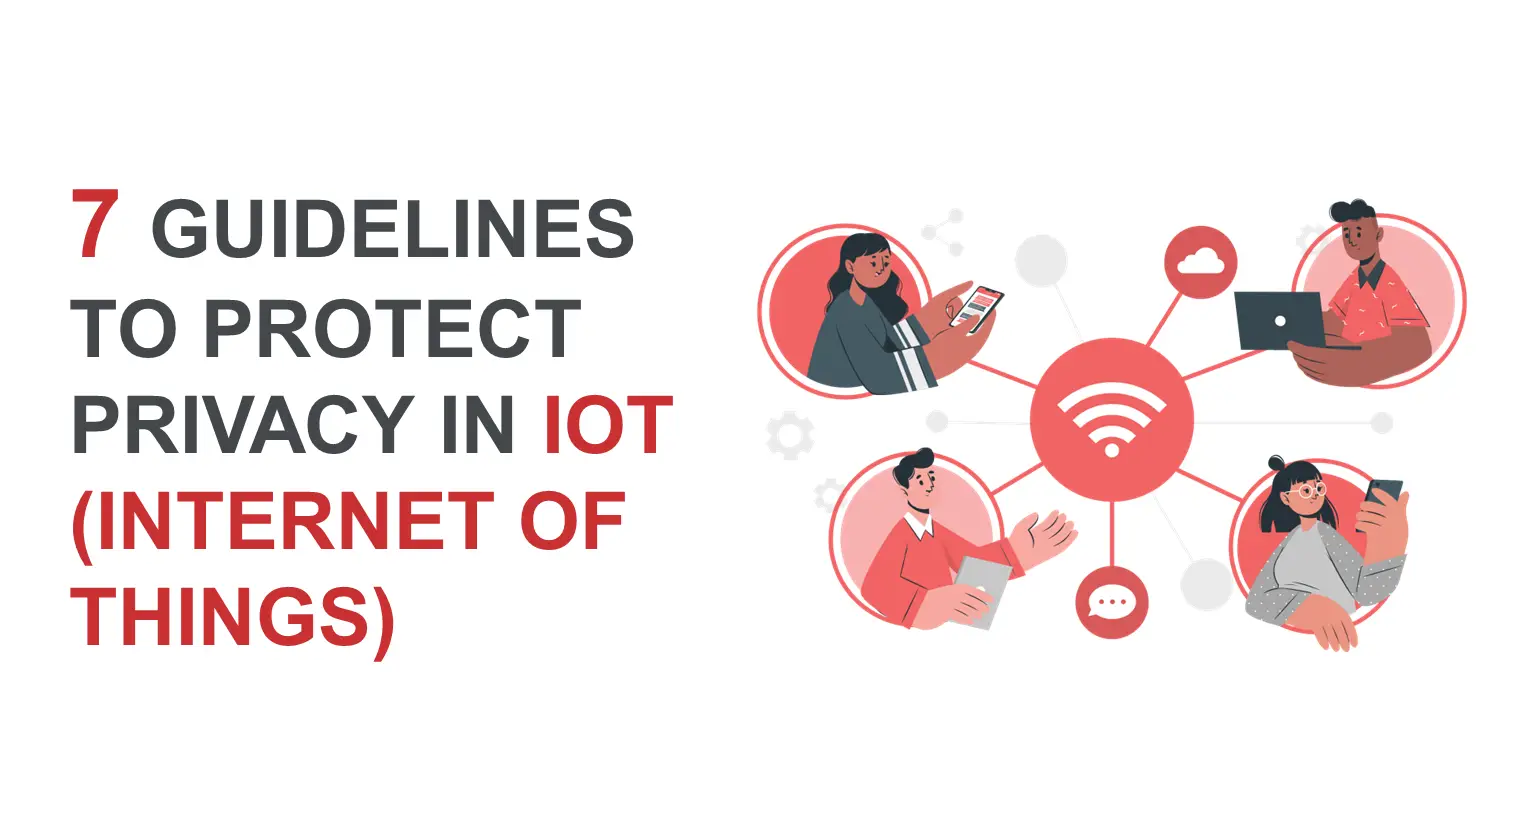 7 Guidelines to Protect Privacy in IoT (Internet of Things)